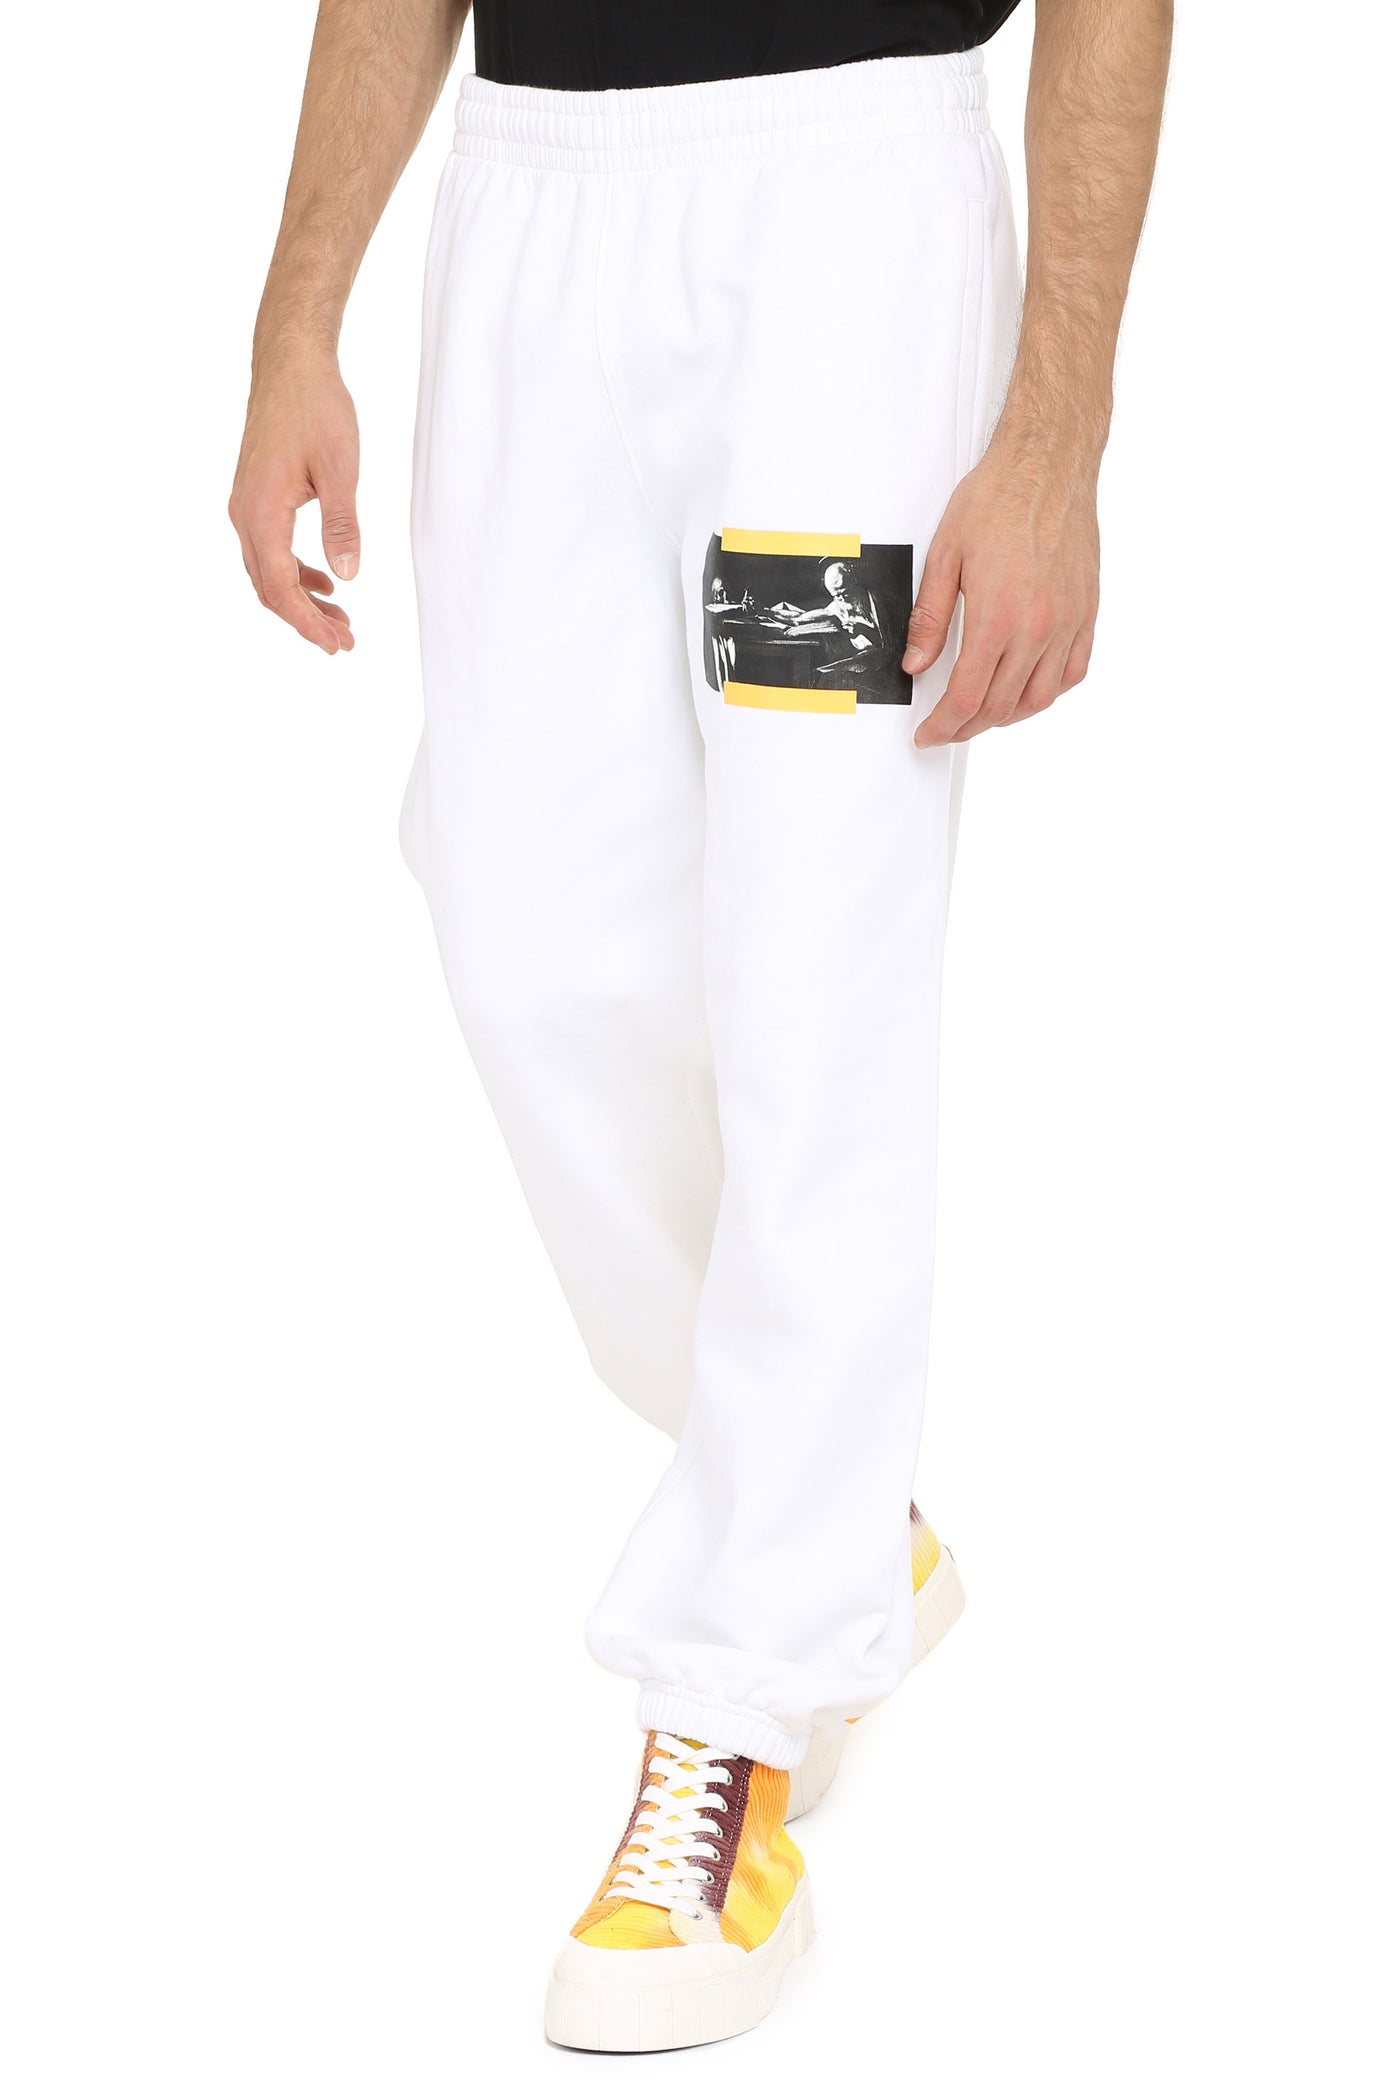 0184 OFF-WHITE COTTON TRACK-PANTS